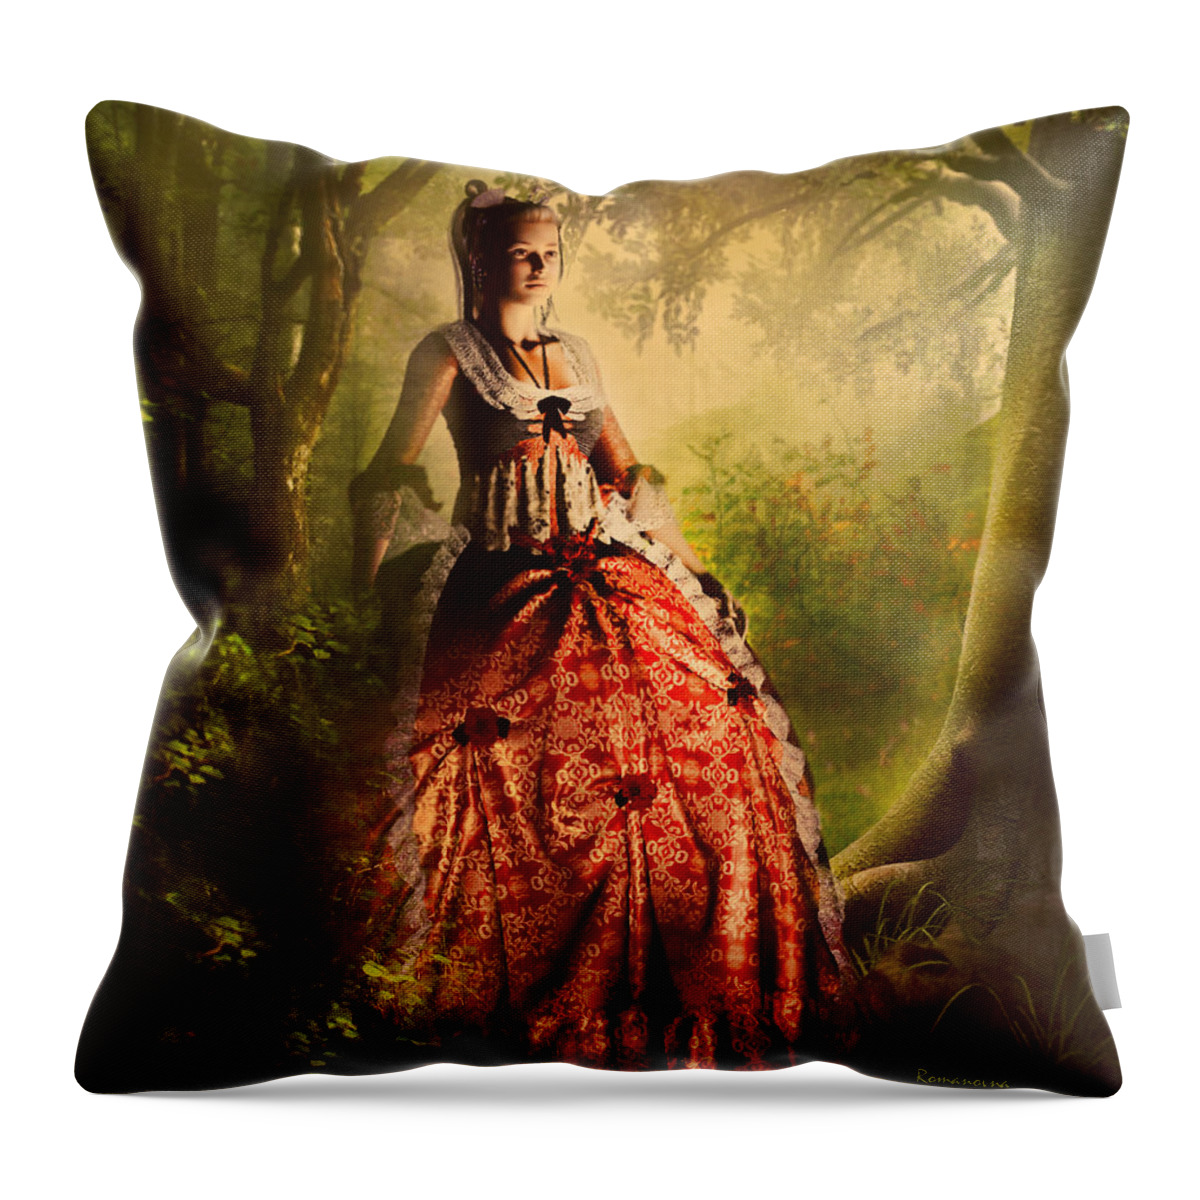 3d Throw Pillow featuring the mixed media Come To Me In The Moonlight by Georgiana Romanovna